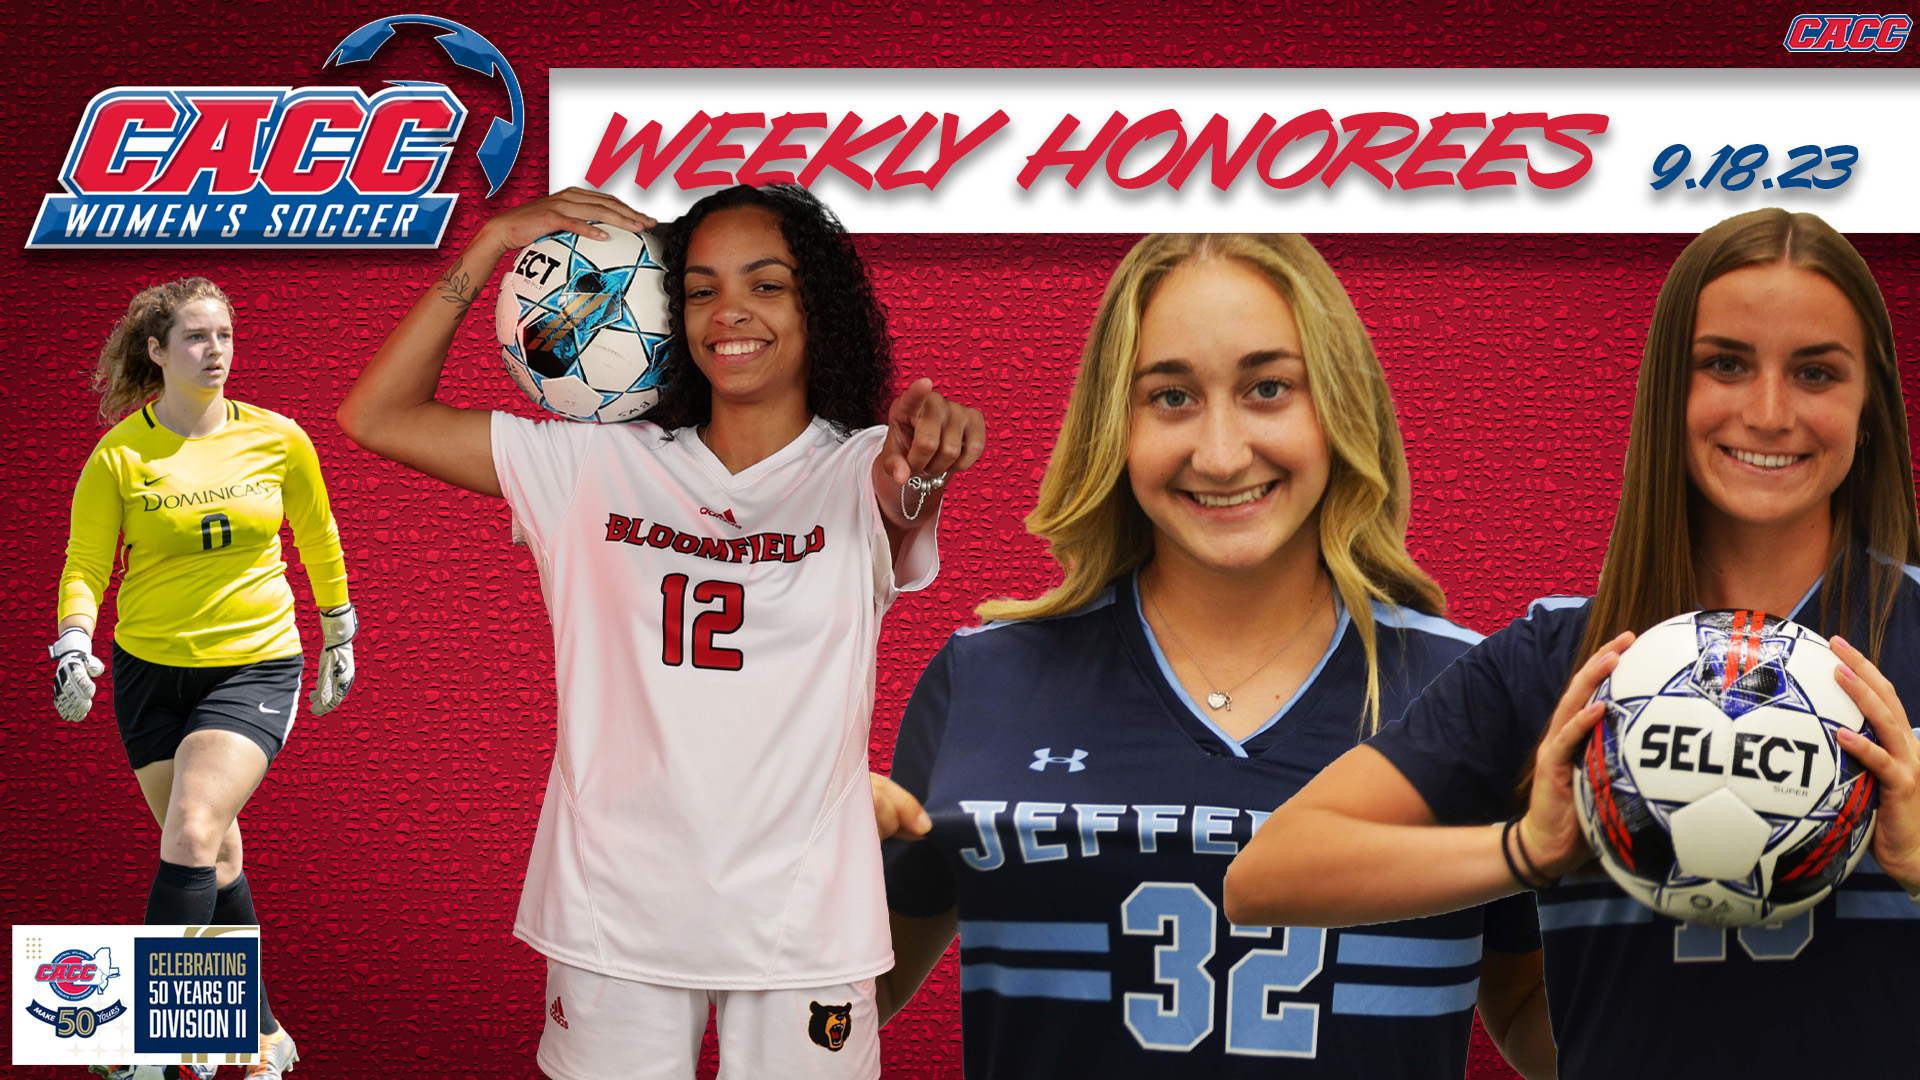 CACC Women's Soccer Weekly Honorees (9-18-23)